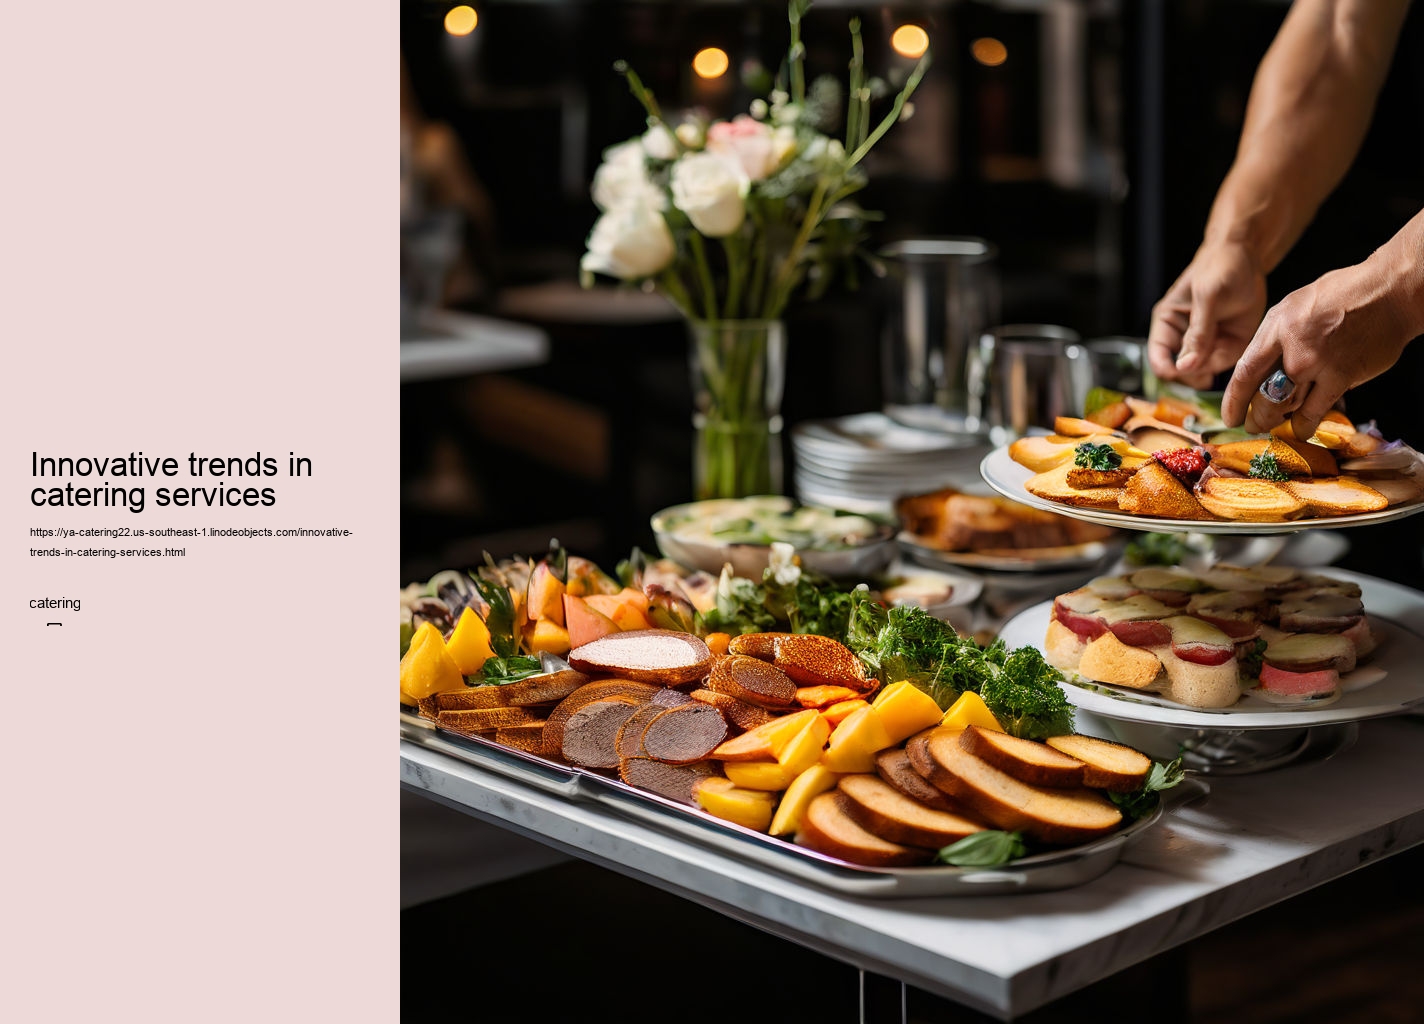 Innovative trends in catering services